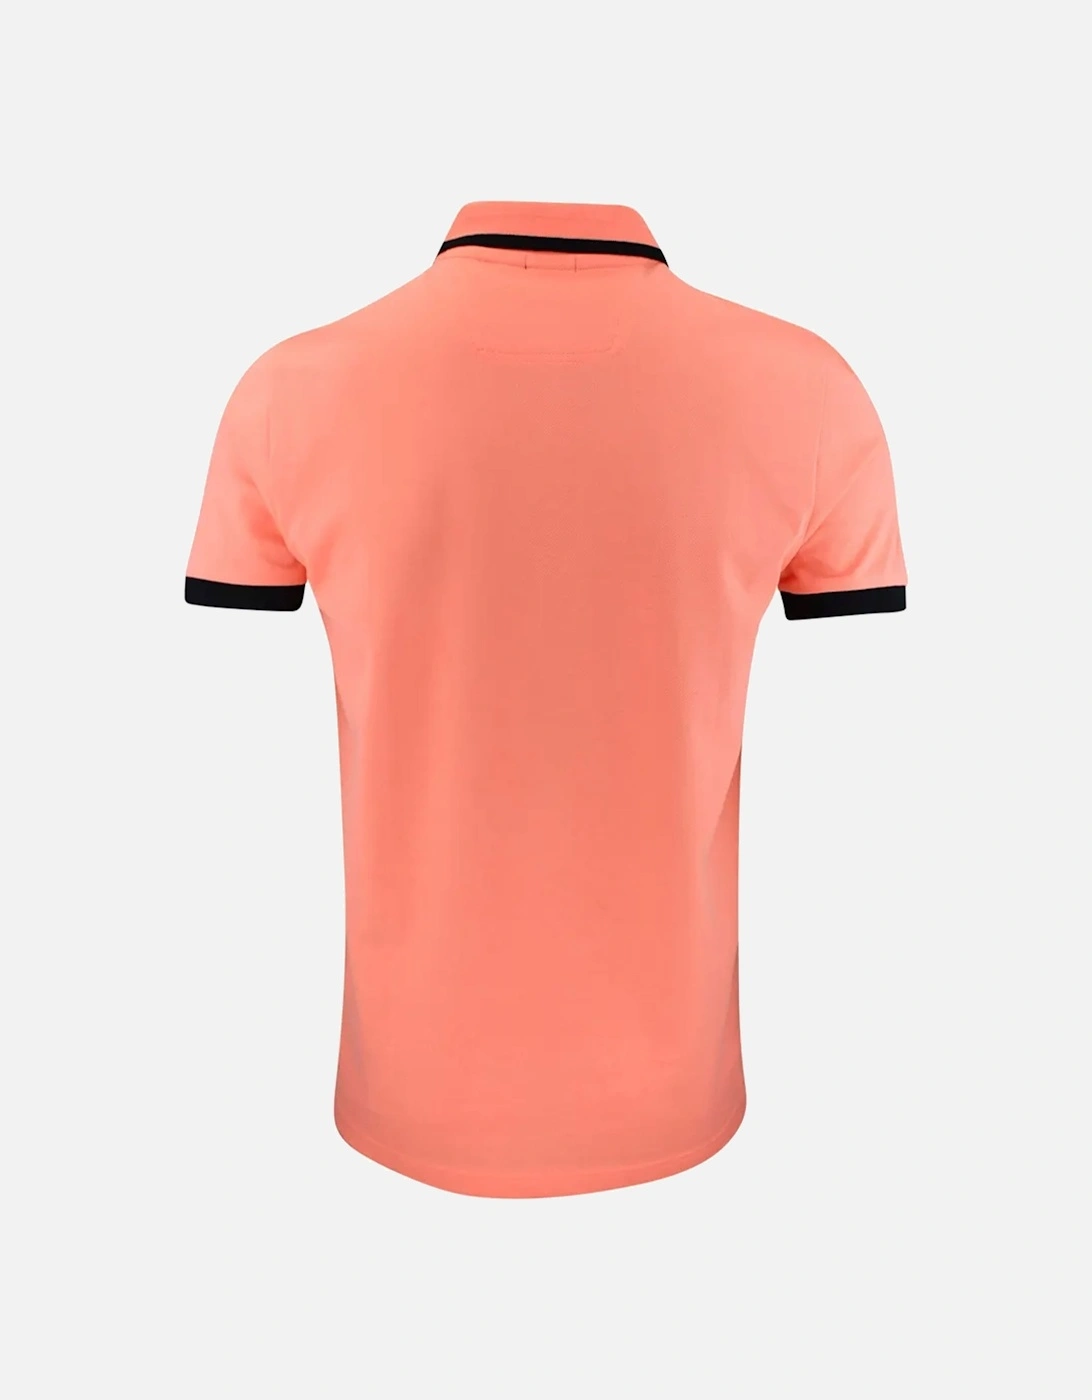 Boss Paddy 1 Polo Shirt Open Red